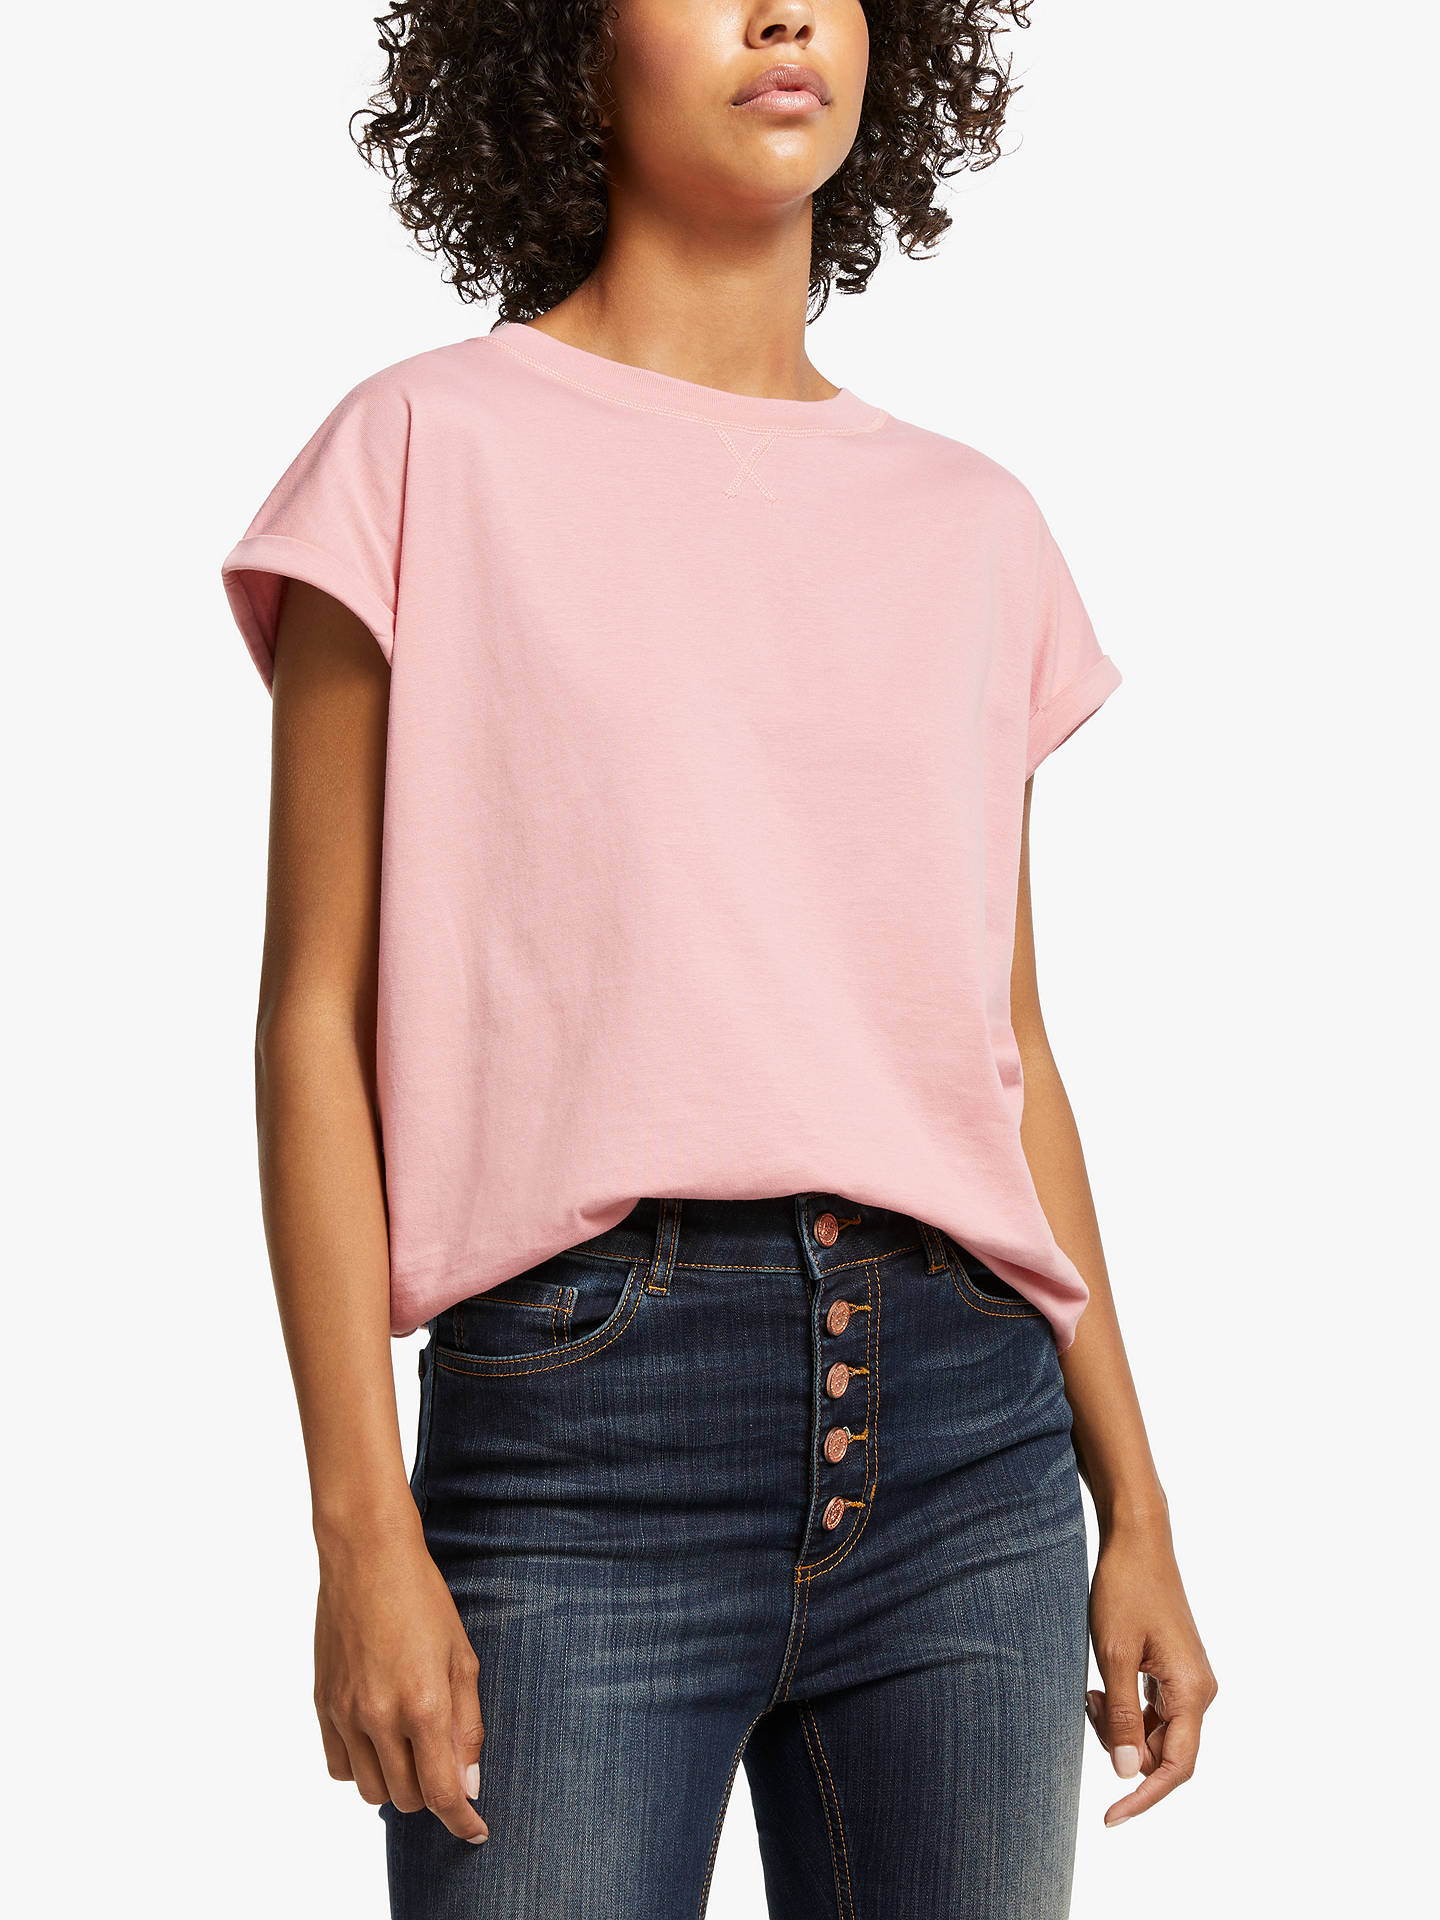 AND/OR Cotton Tank T-Shirt, Dusty Rose at John Lewis & Partners